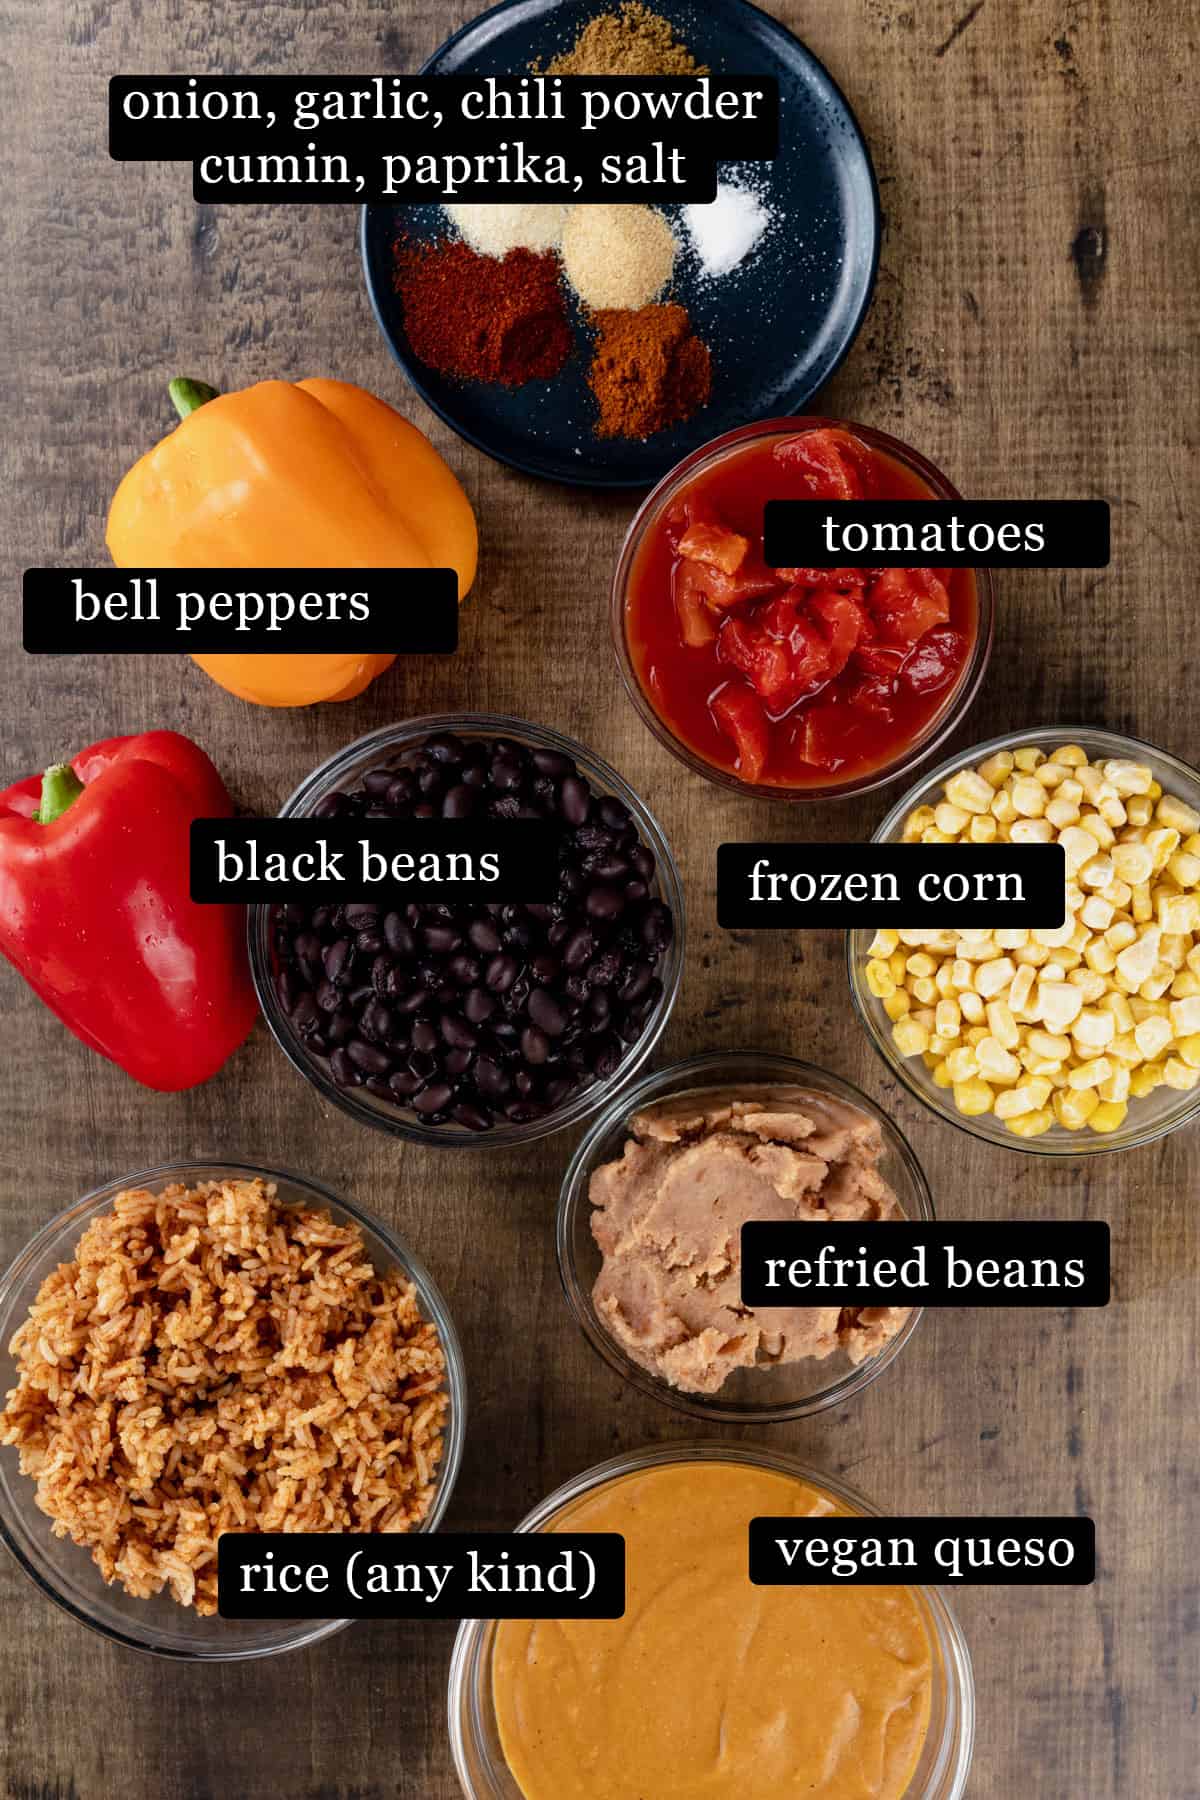 Ingredients for the taco casserole in various glass bowls on a wood tabletop. Black and white labels have been added to name each ingredient like "black beans" and "frozen corn".